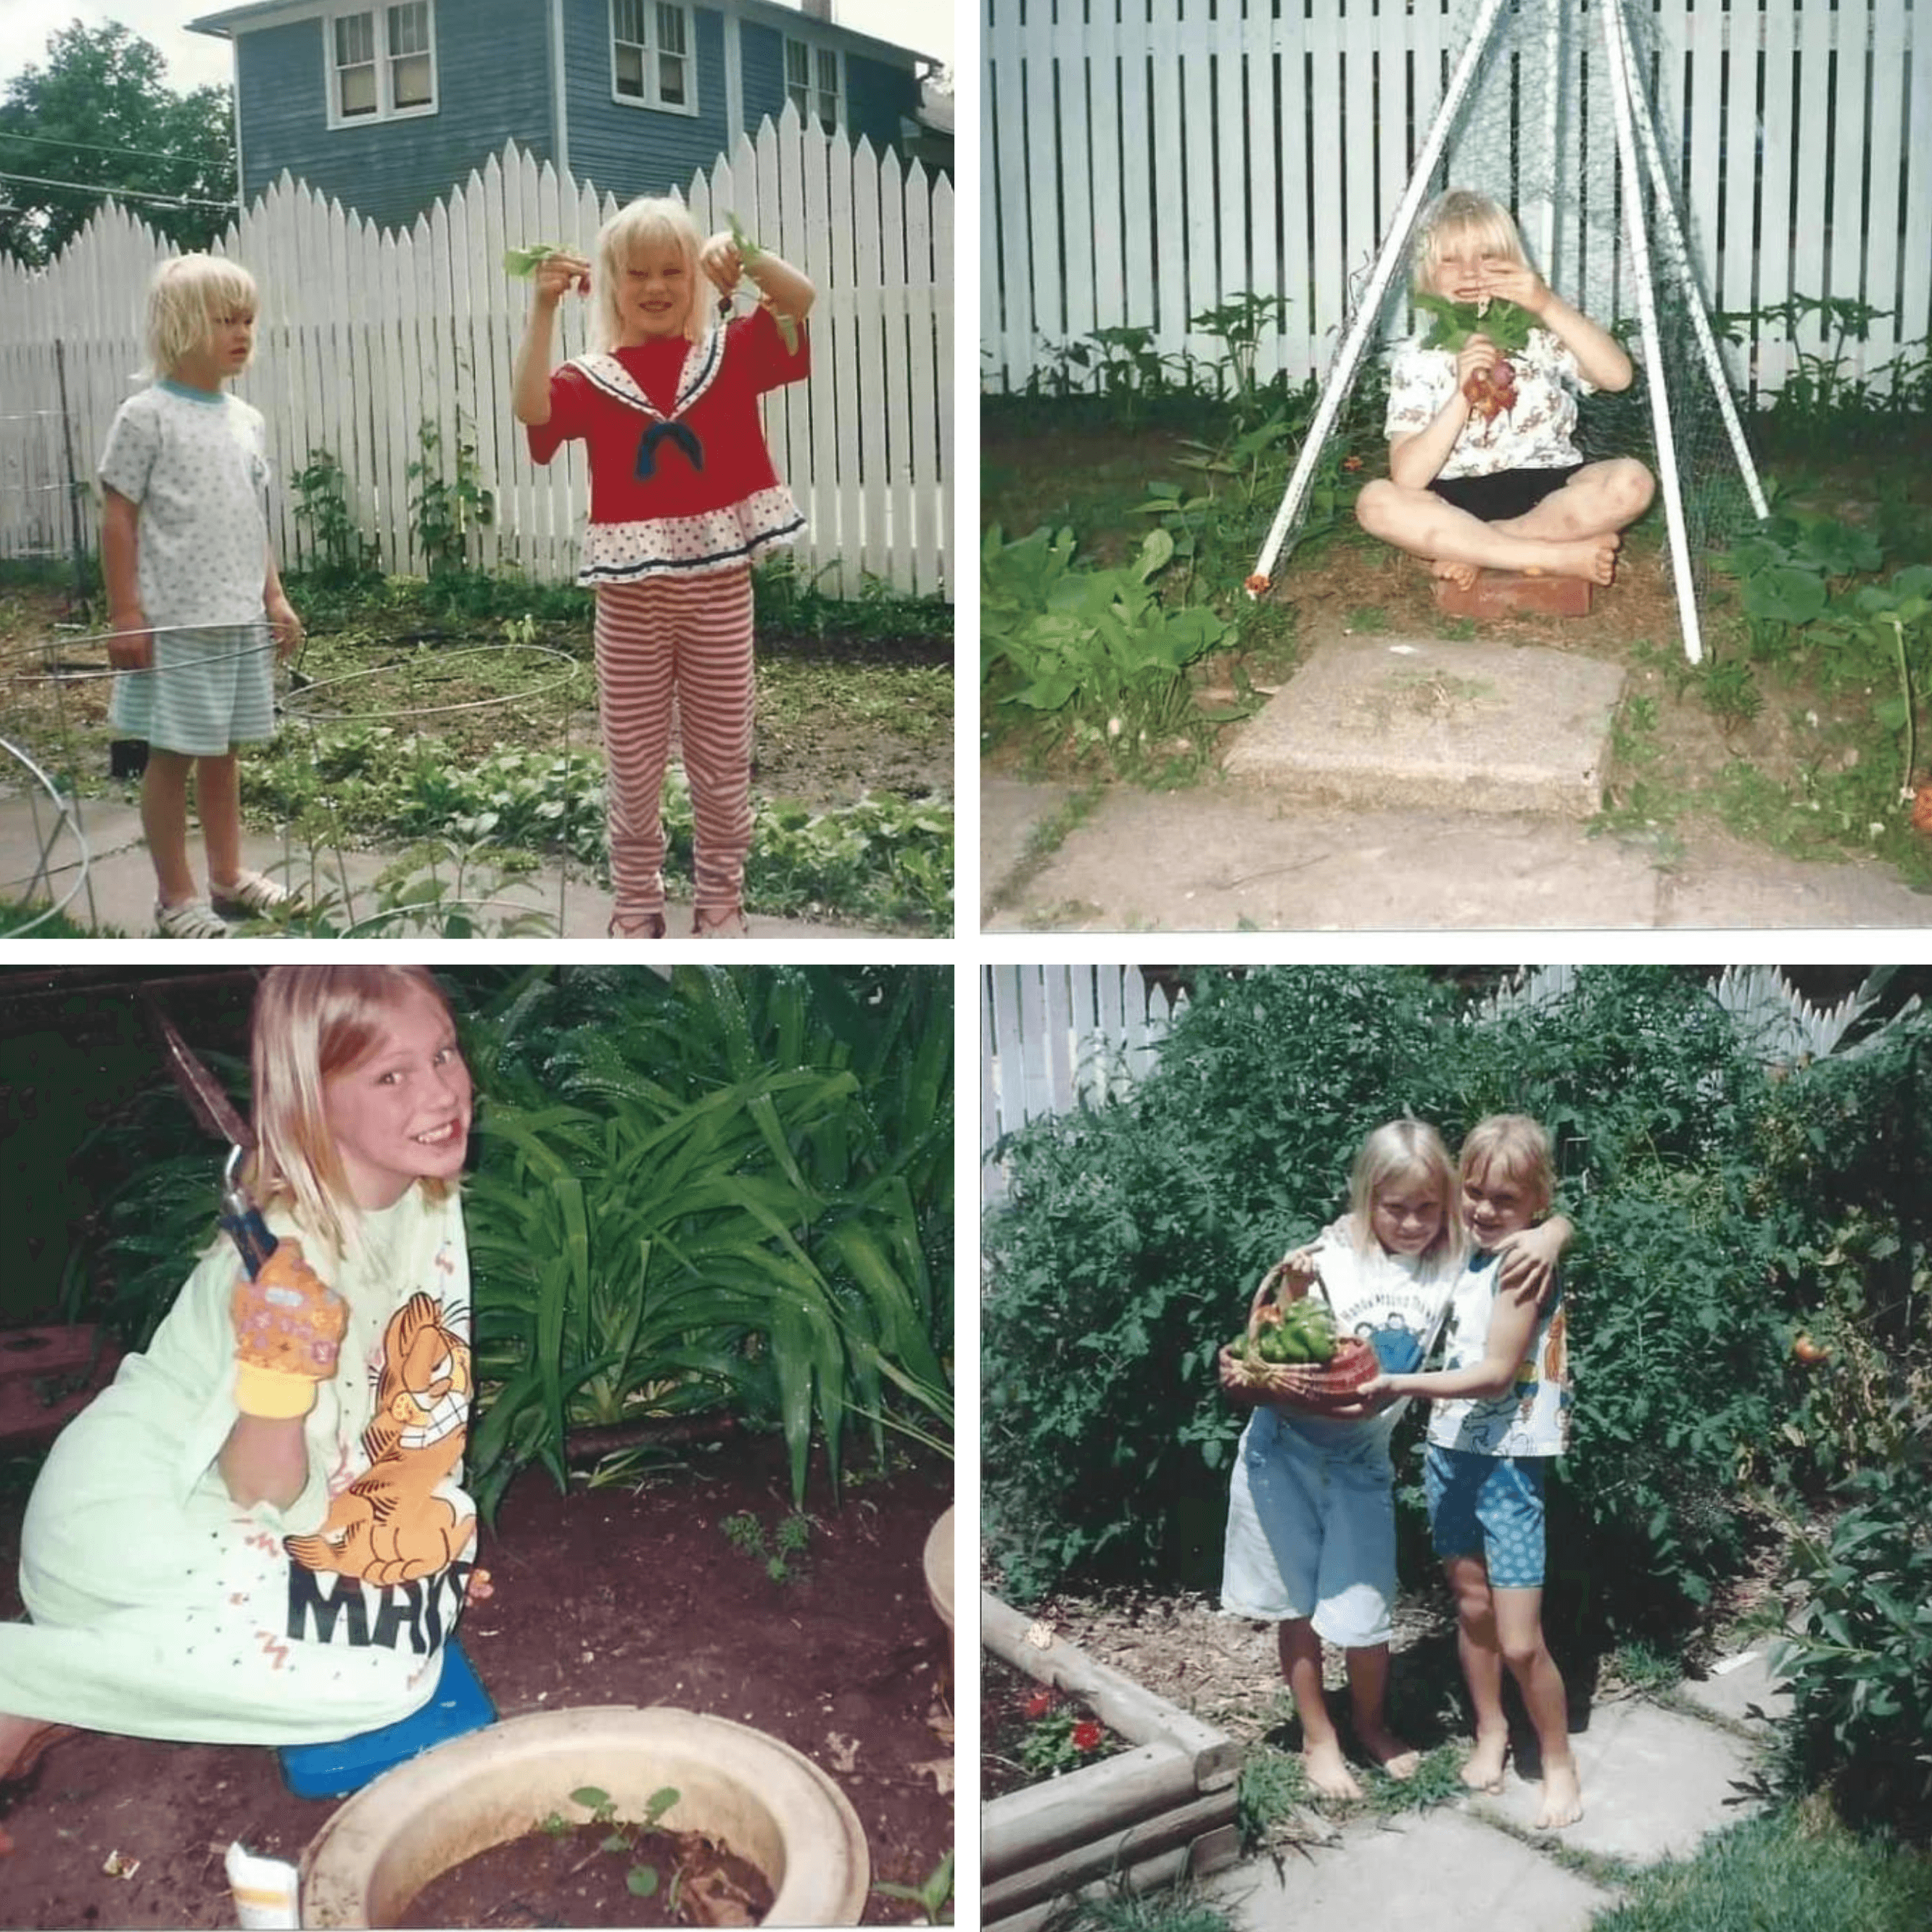 A young Hanna and her sister helping out in the garden.